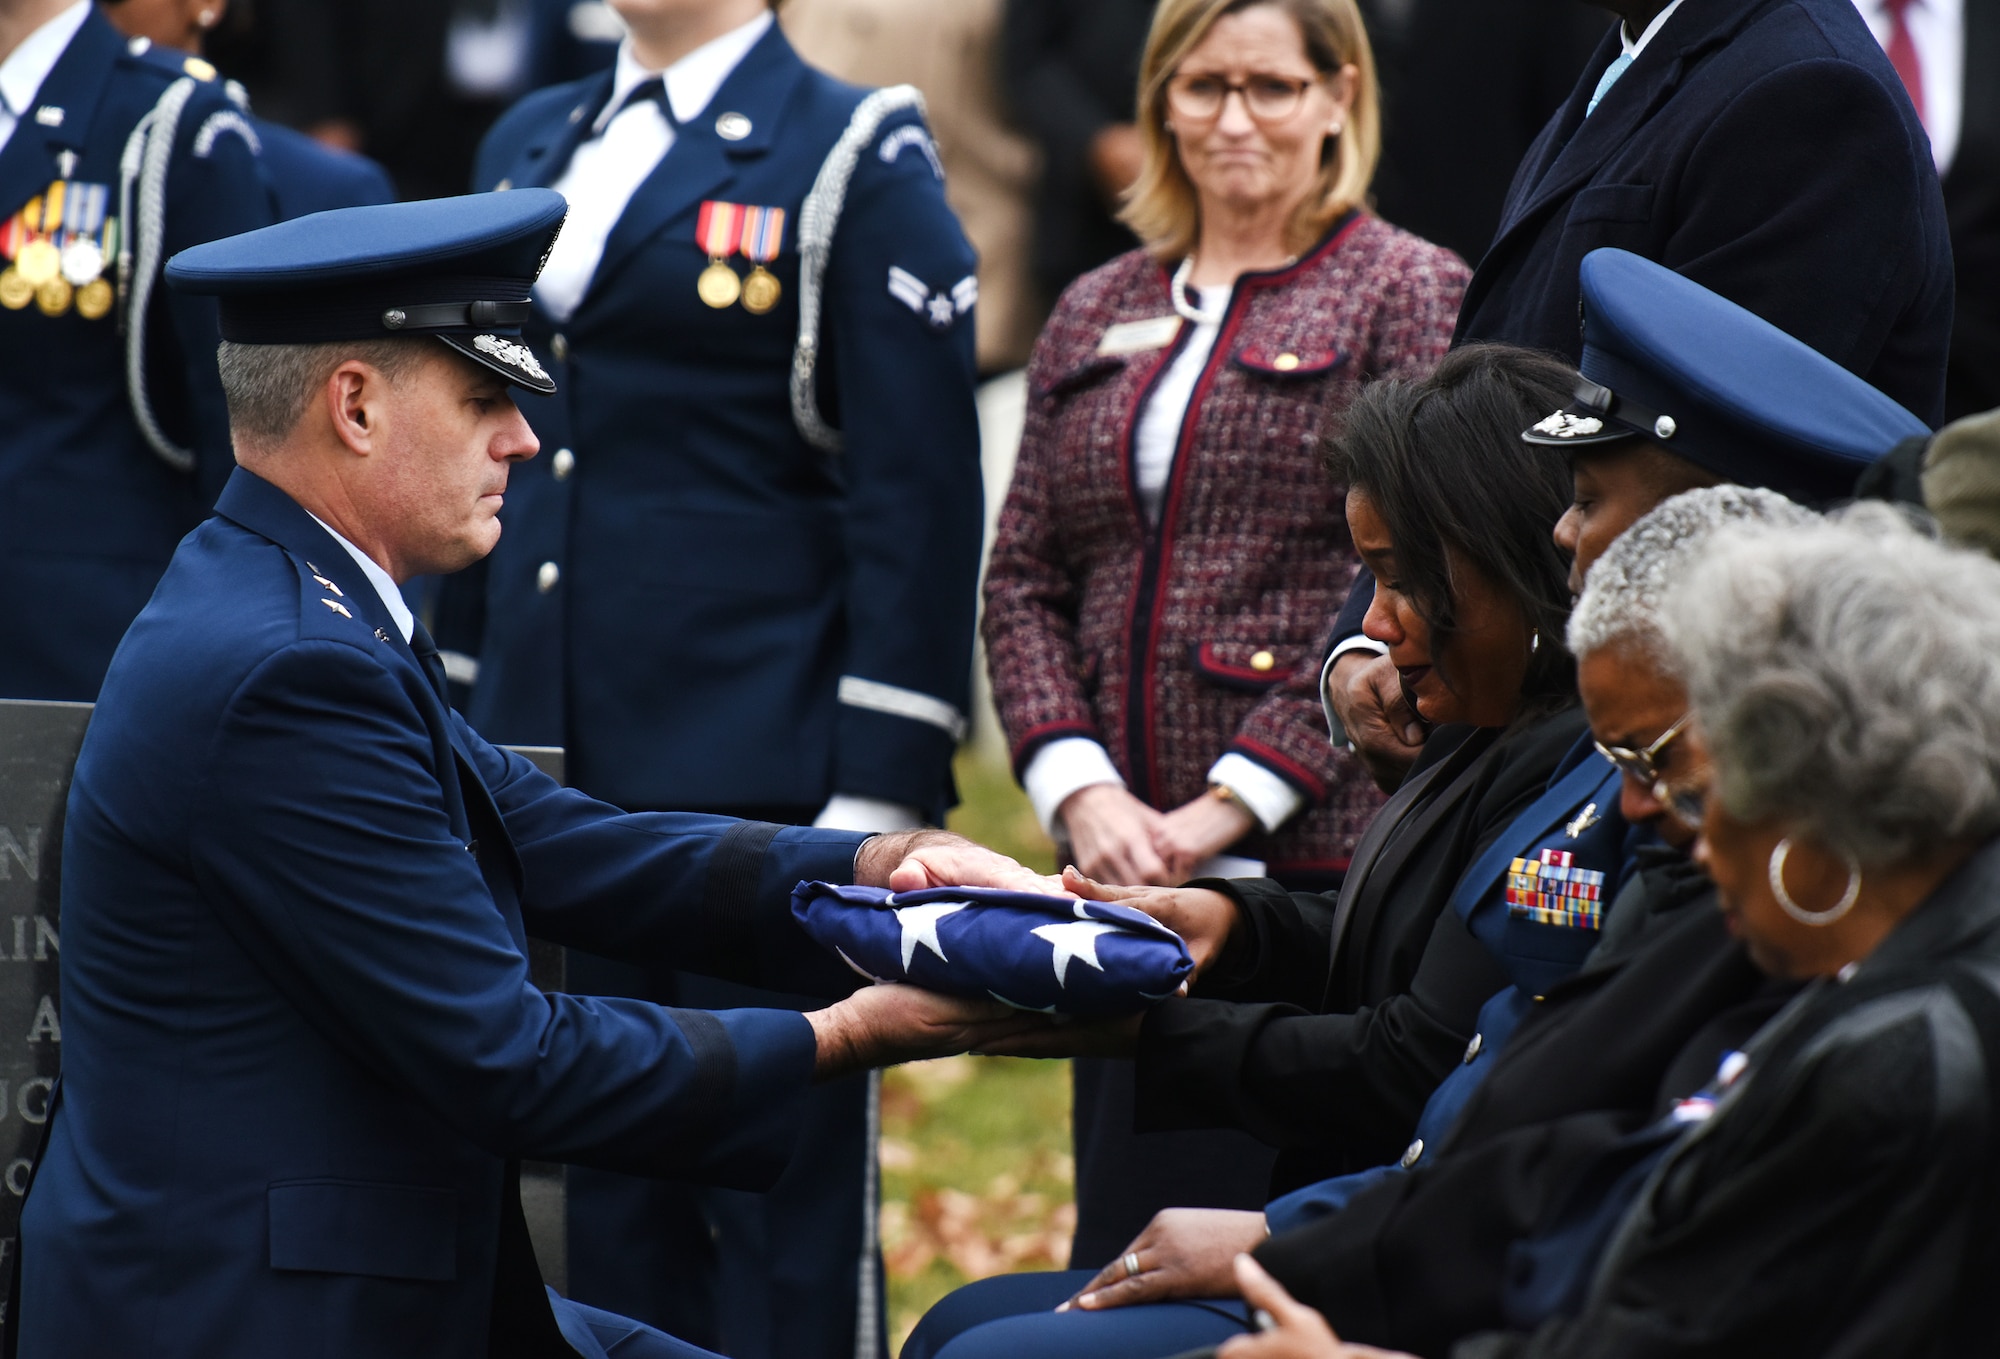 U.S. Air Force Maj. Gen. Lenny Richoux, the commander of U.S. Transportation Command’s Joint Enabling Capabilities Command, presents the American Flag to retired U.S. Air Force Maj. Gen. Mareclite Harris’s daughter, Tenecia Harris, during a full honors funeral at Arlington National Cemetery, Arlington, Va., Feb. 7, 2019. Gen. Harris’s accomplishments include being the first woman aircraft maintenance officer, one of the first two women air officers commanding at the U.S. Air Force Academy and the first woman deputy commander for maintenance. She also served as a White House social aide during the Carter administration. (U.S. Air Force photo by Staff Sgt. Rusty Frank)